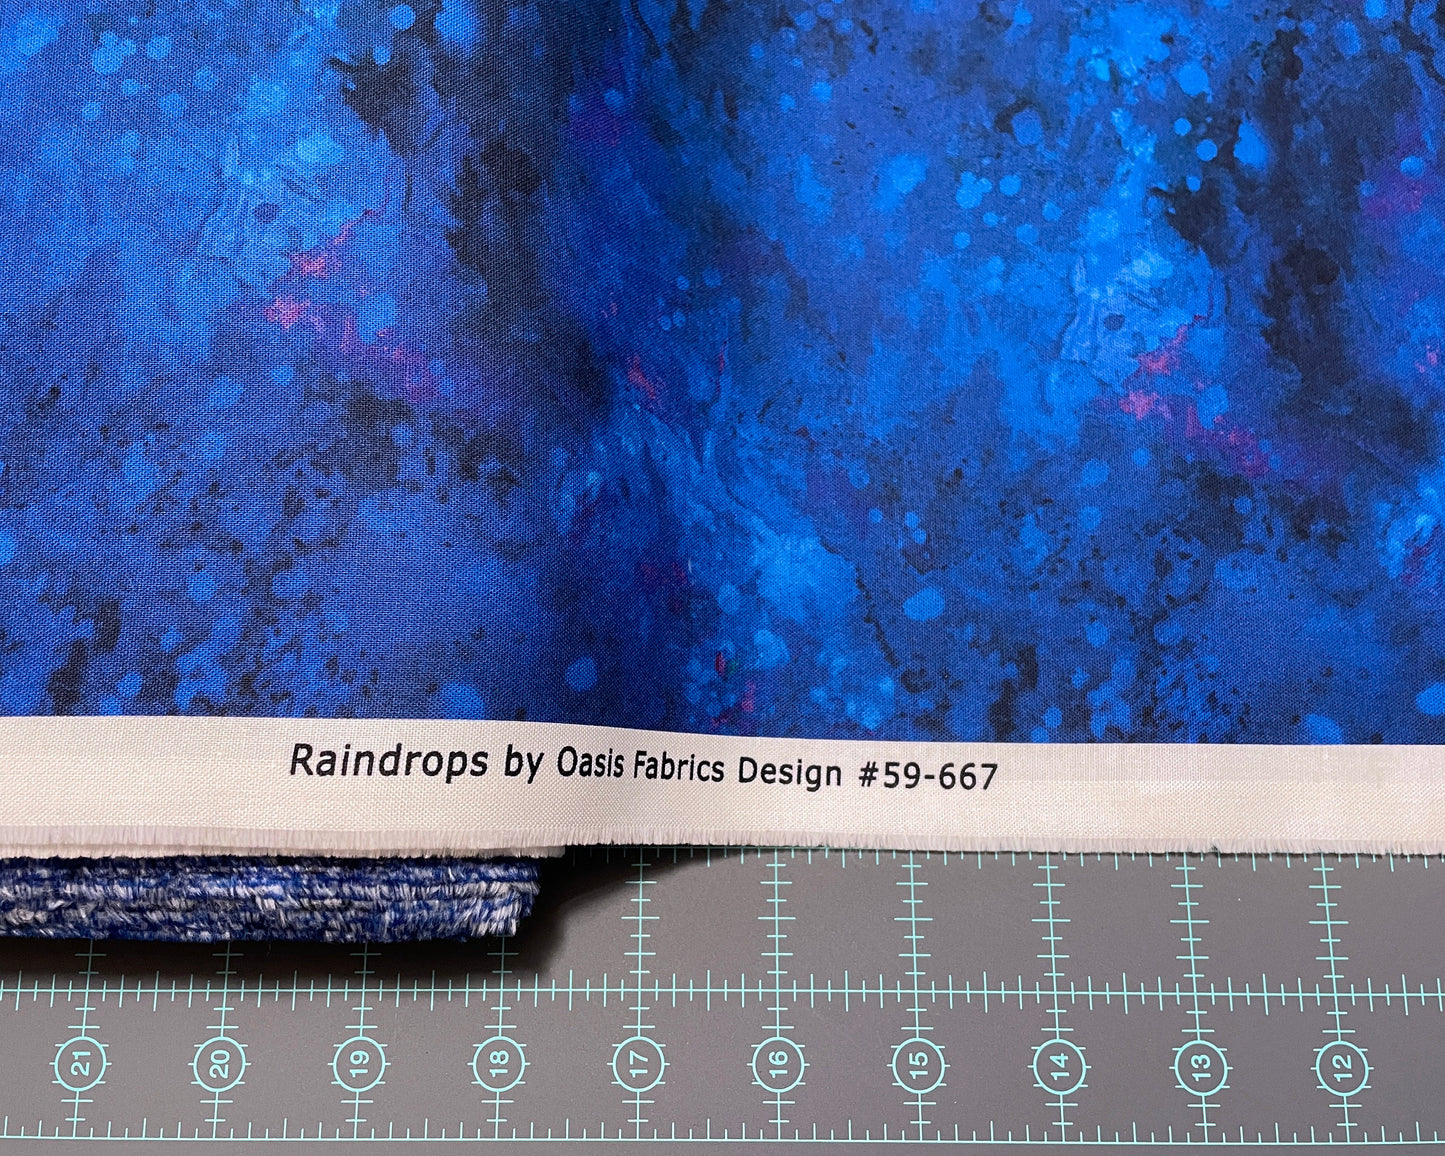 Dark Blue Blender Fabric - Raindrops Collection by Oasis Fabrics - 100% Cotton Fabric - Bright colorful material - Ships NEXT DAY